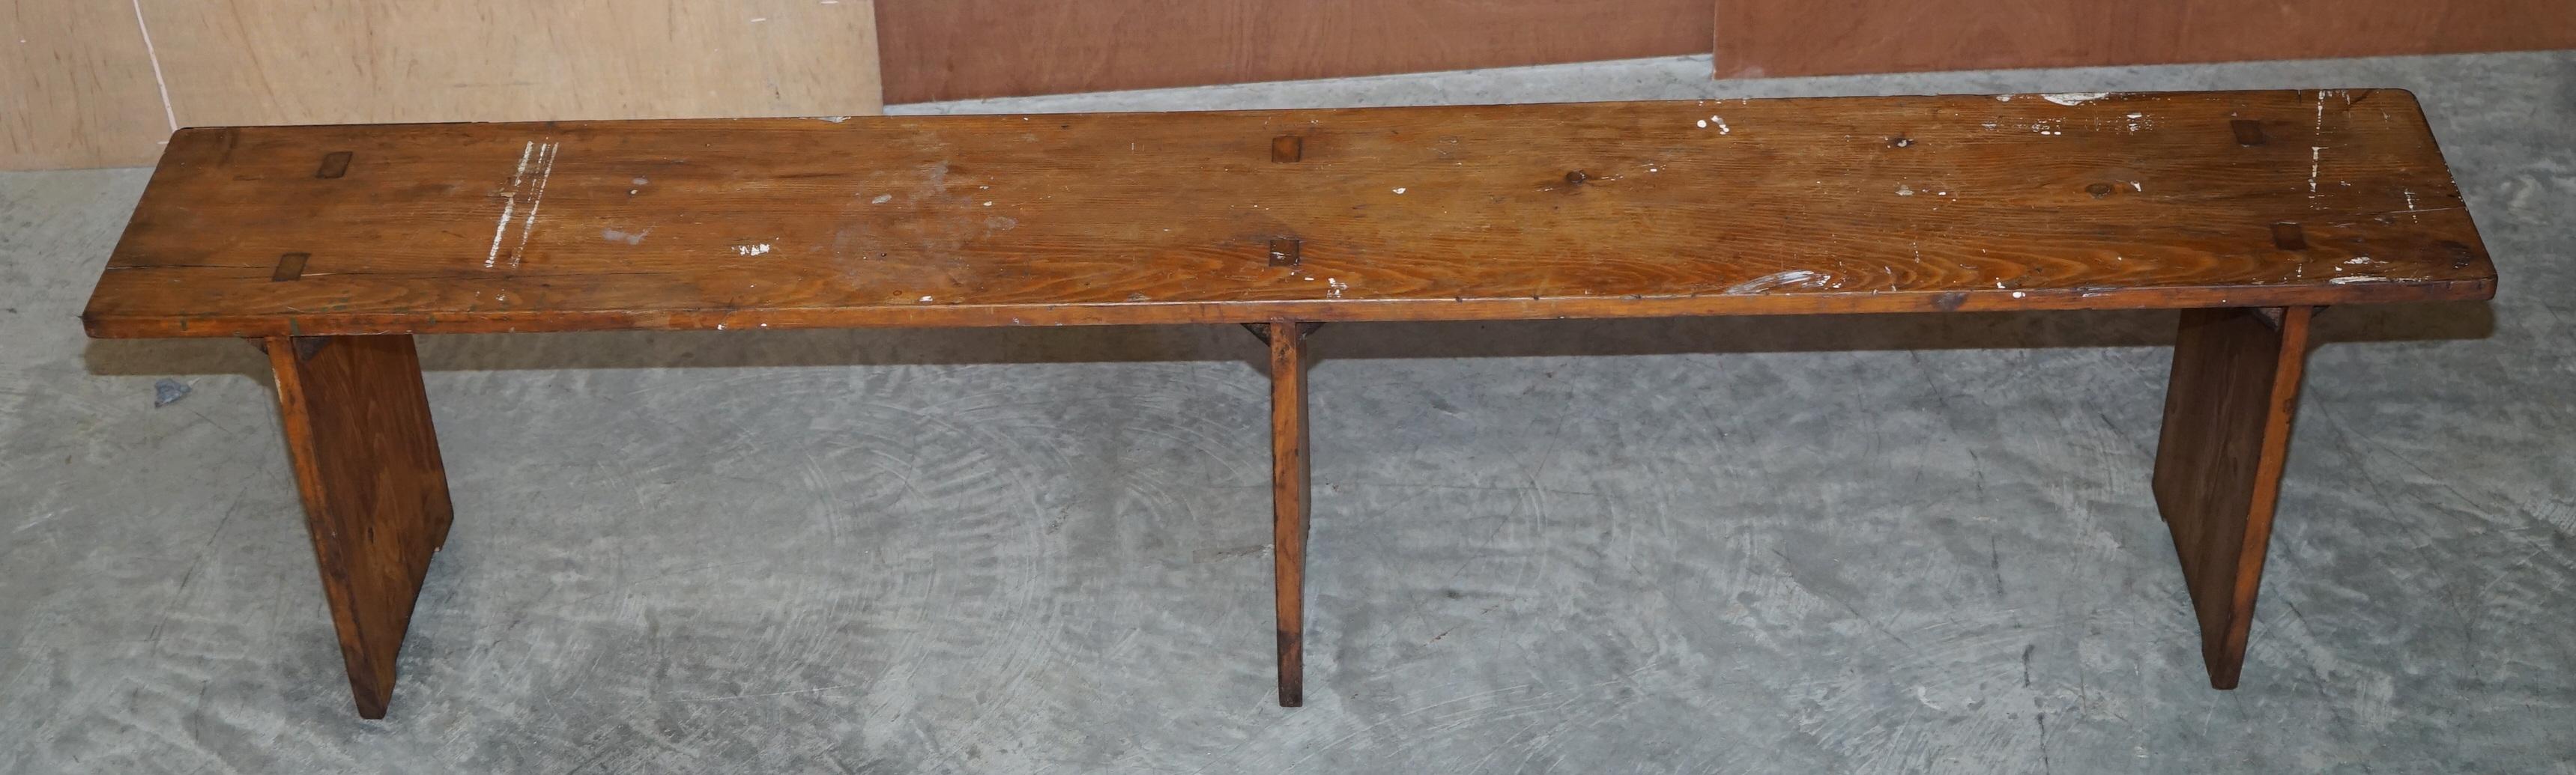 Pair of Lovely Vintage Pitch Pine Benches / Seats for a Refecorty Dining Table For Sale 4